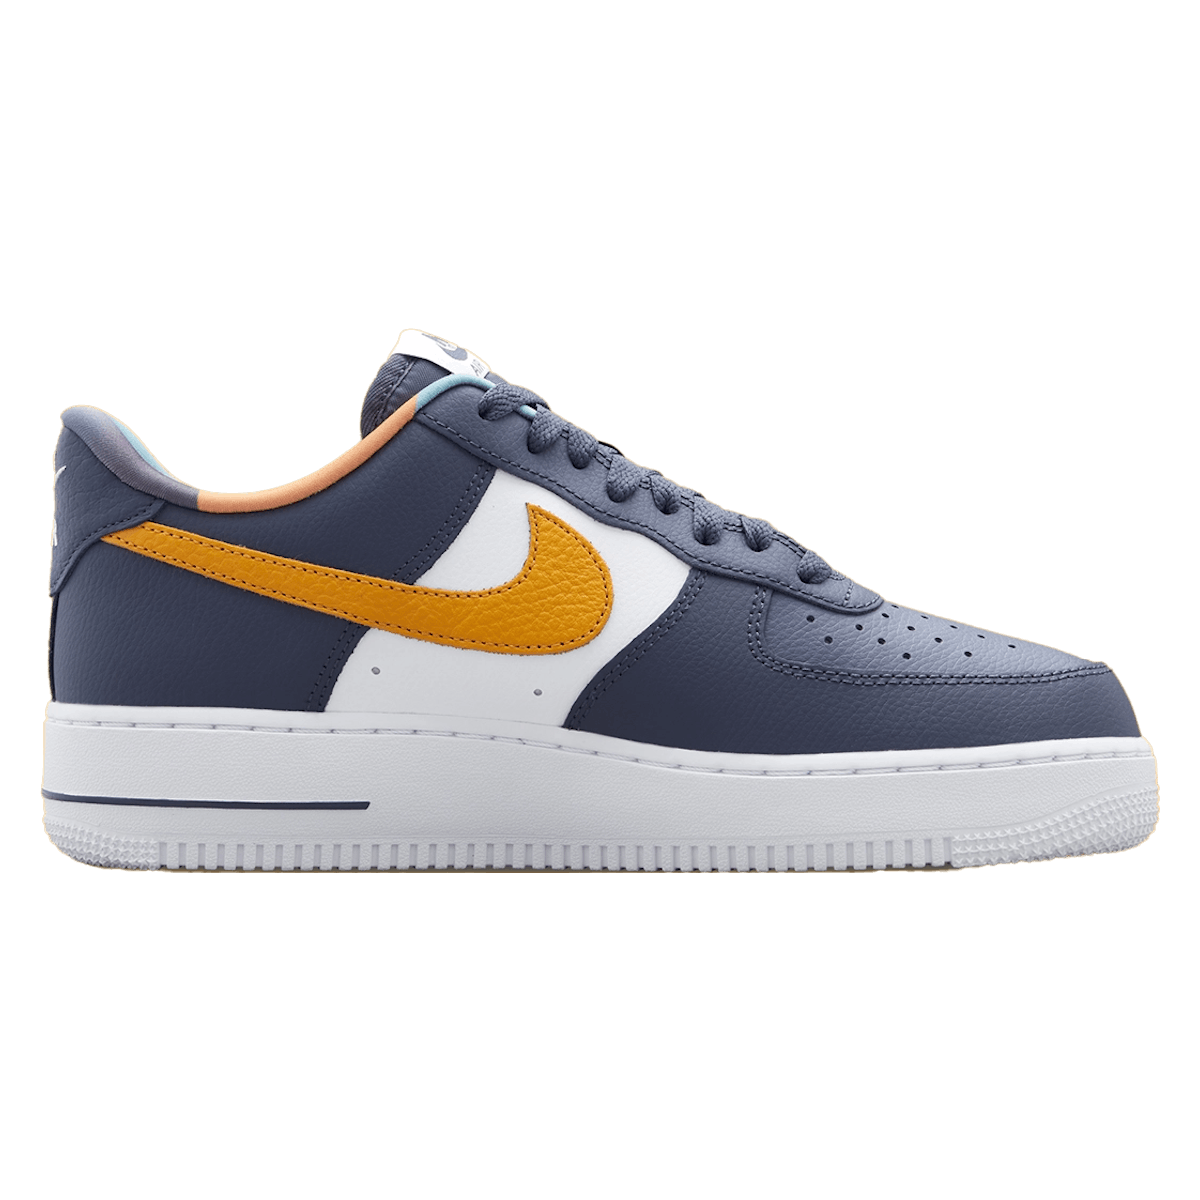 Nike Air Force 1 Low EMB "Thunder Blue"